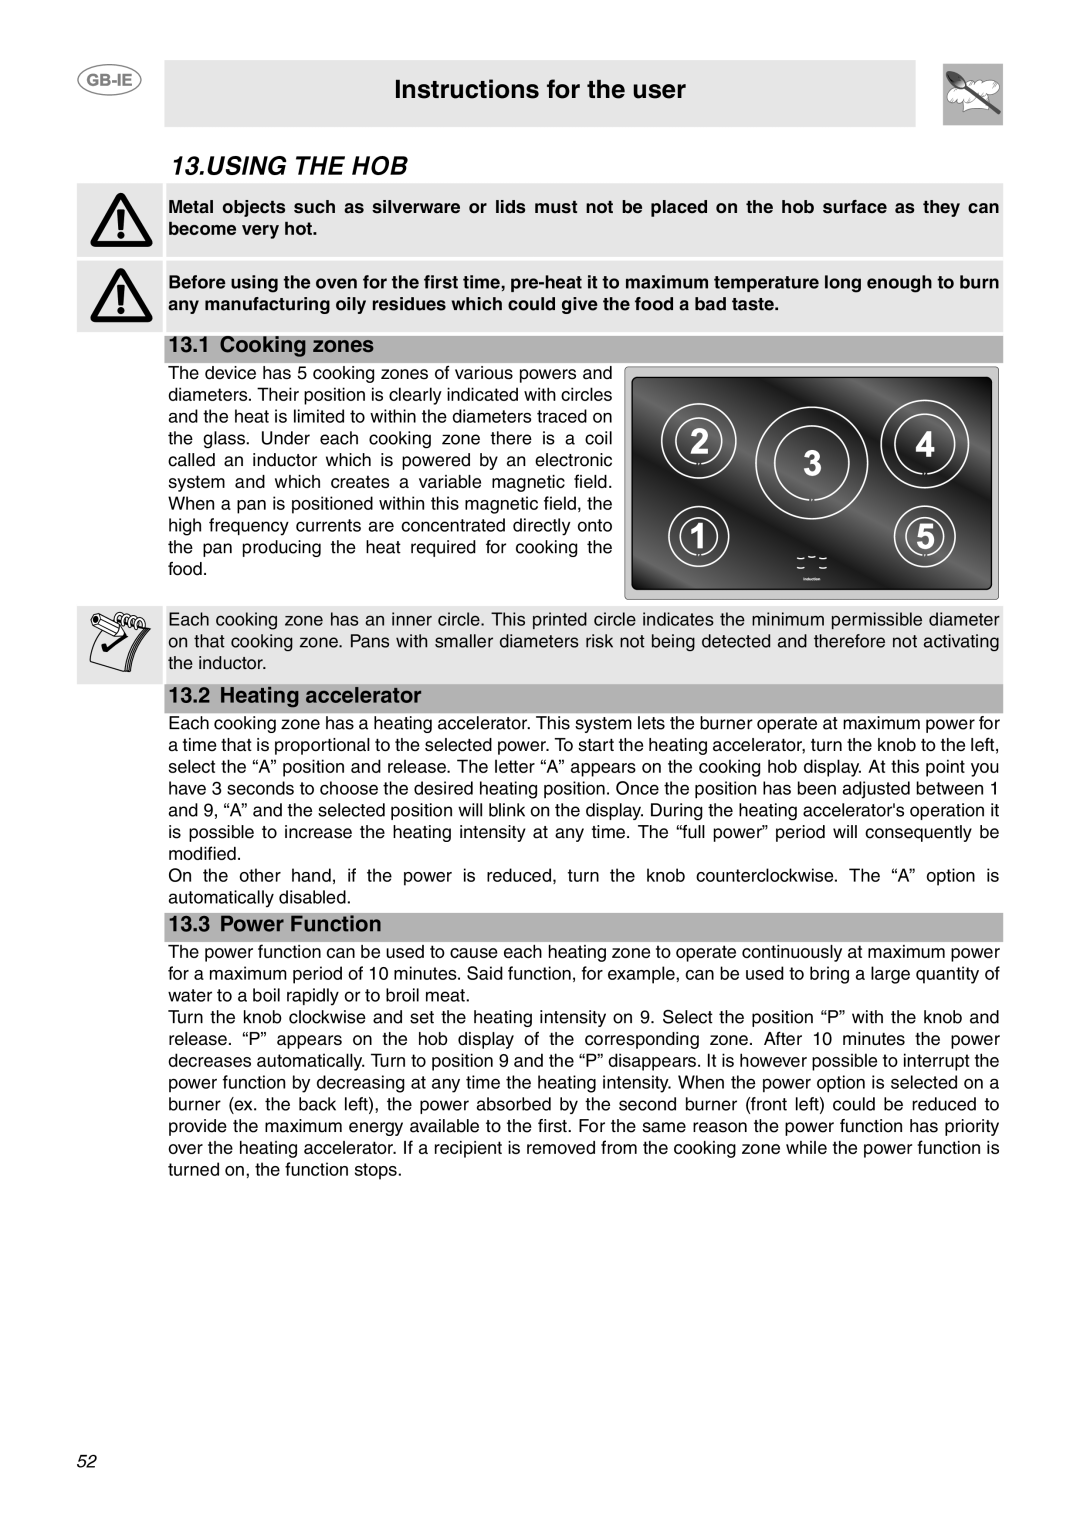 Smeg CE92IPX manual Using The Hob, Cooking zones, Heating accelerator, Power Function, Instructions for the user 